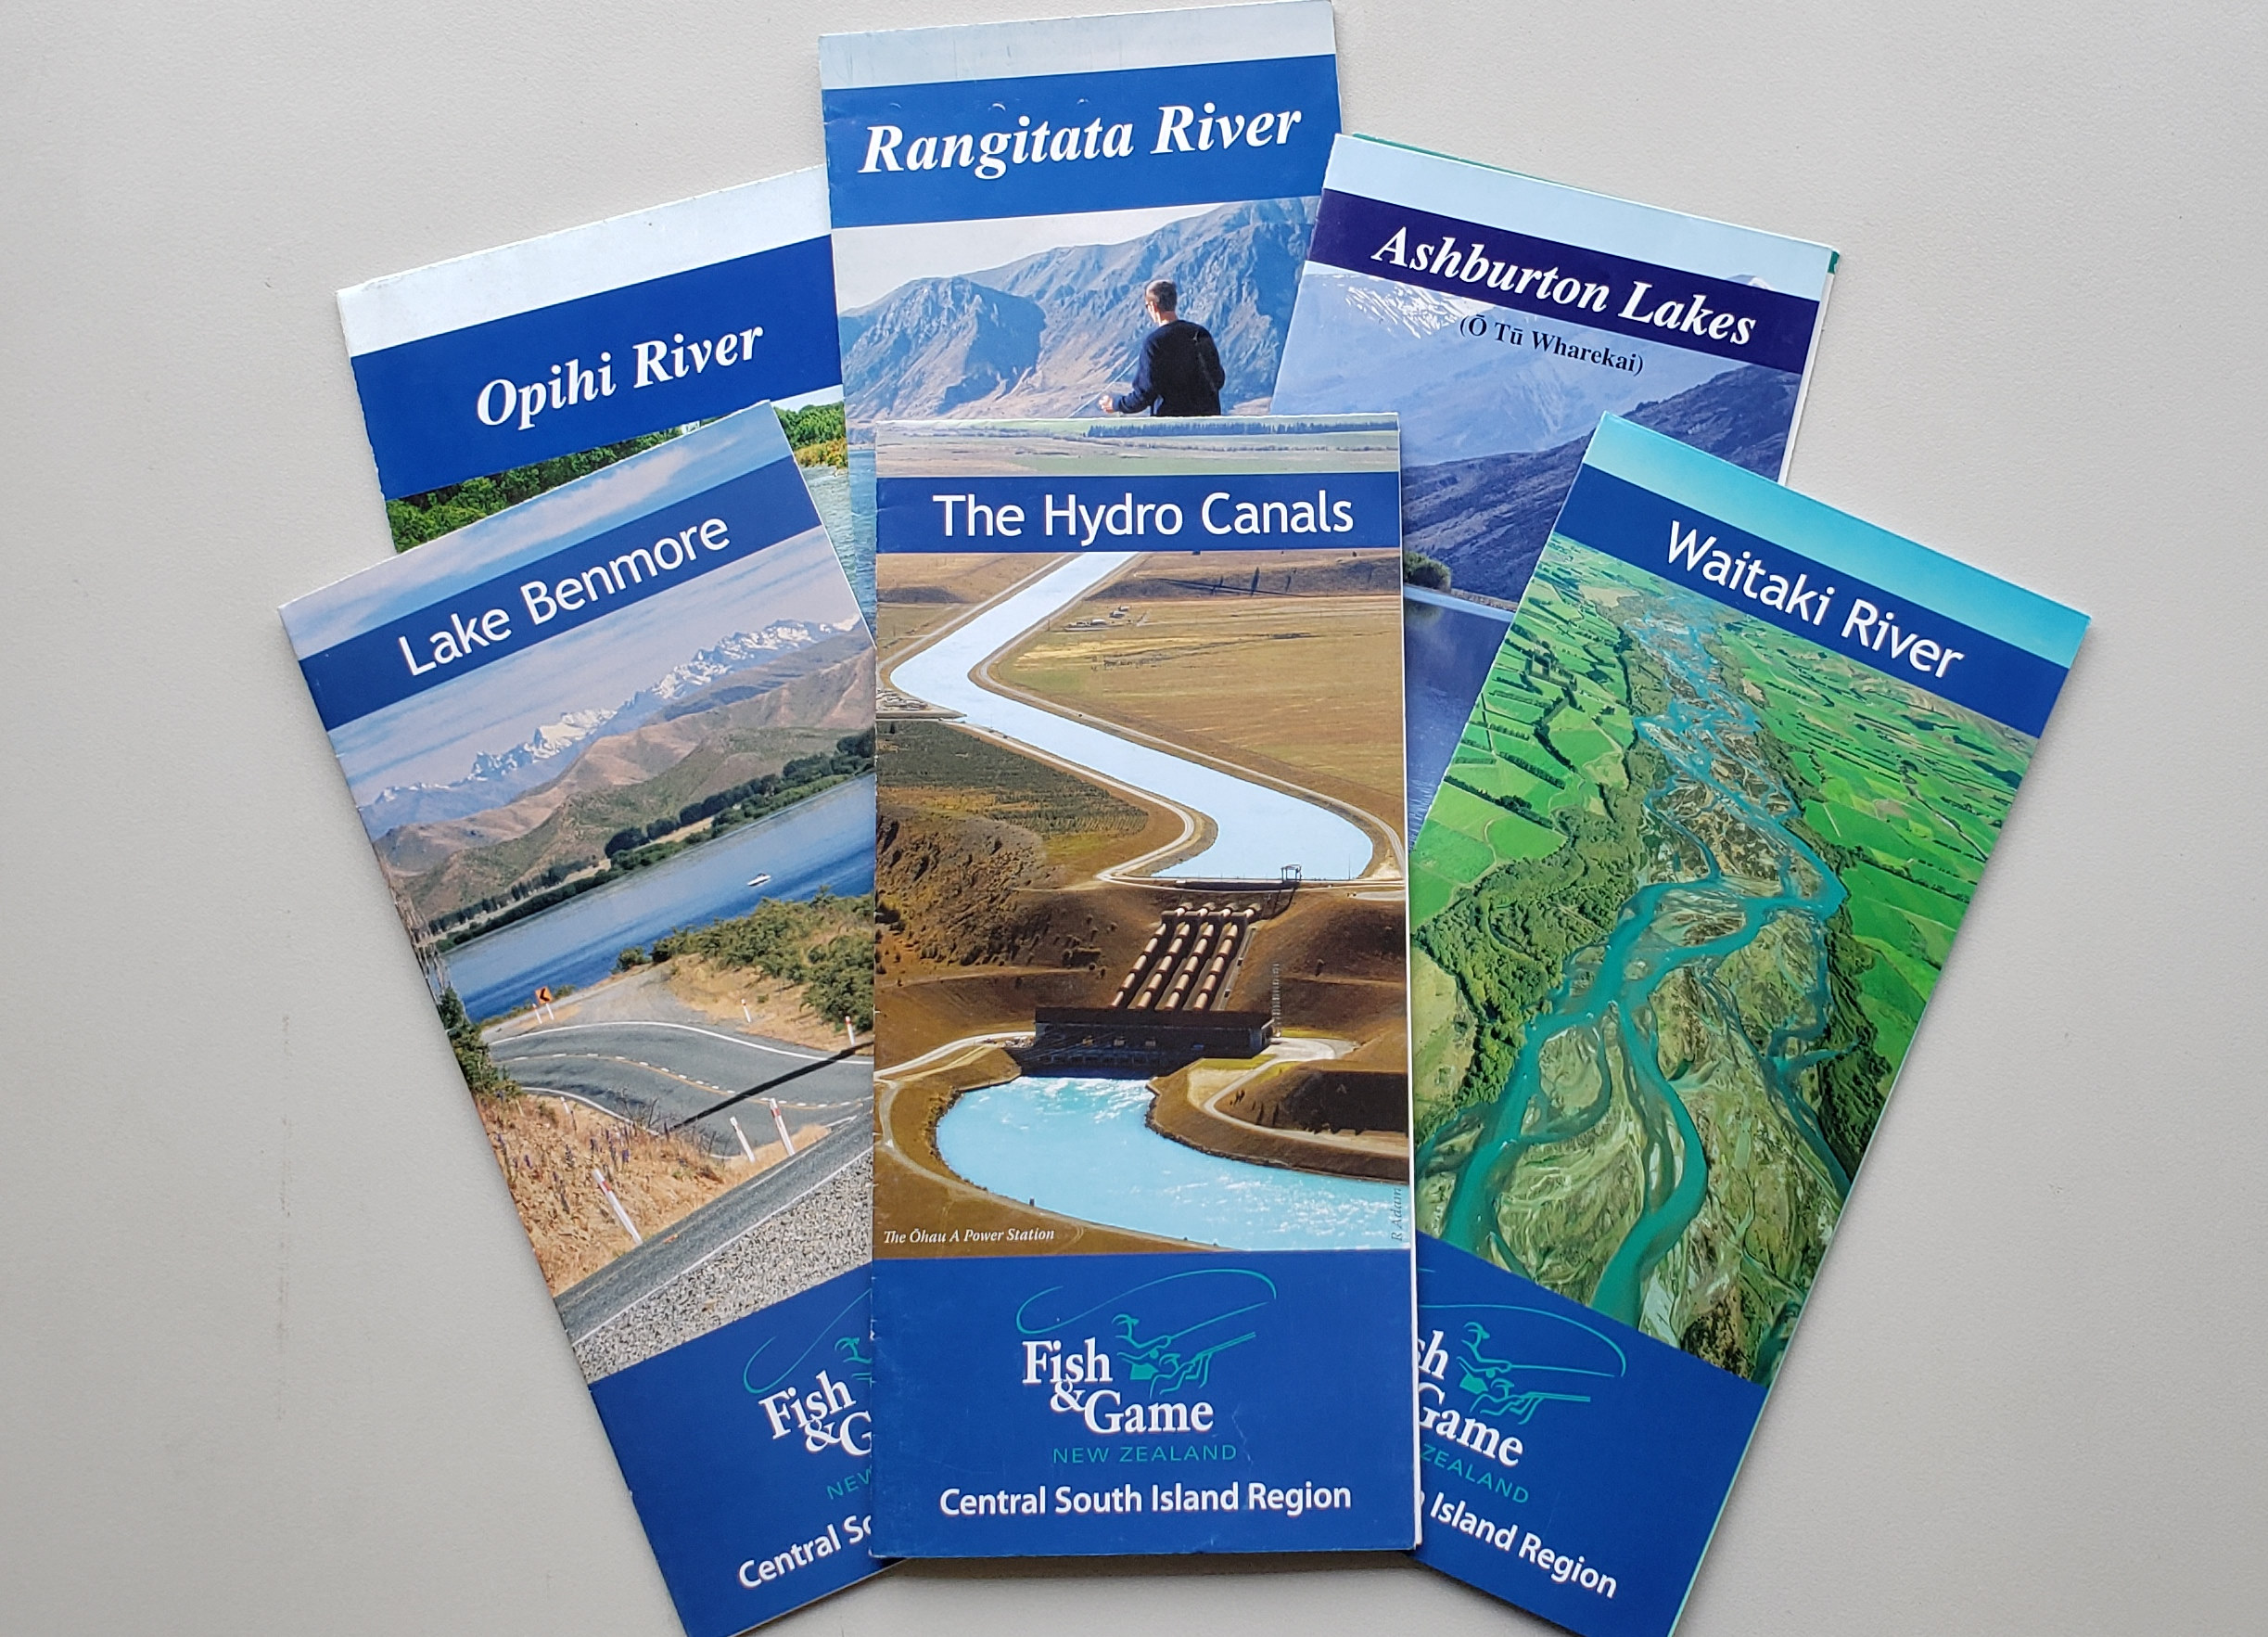 RL dec CSI 2 These CSI angler access guides can be found online3